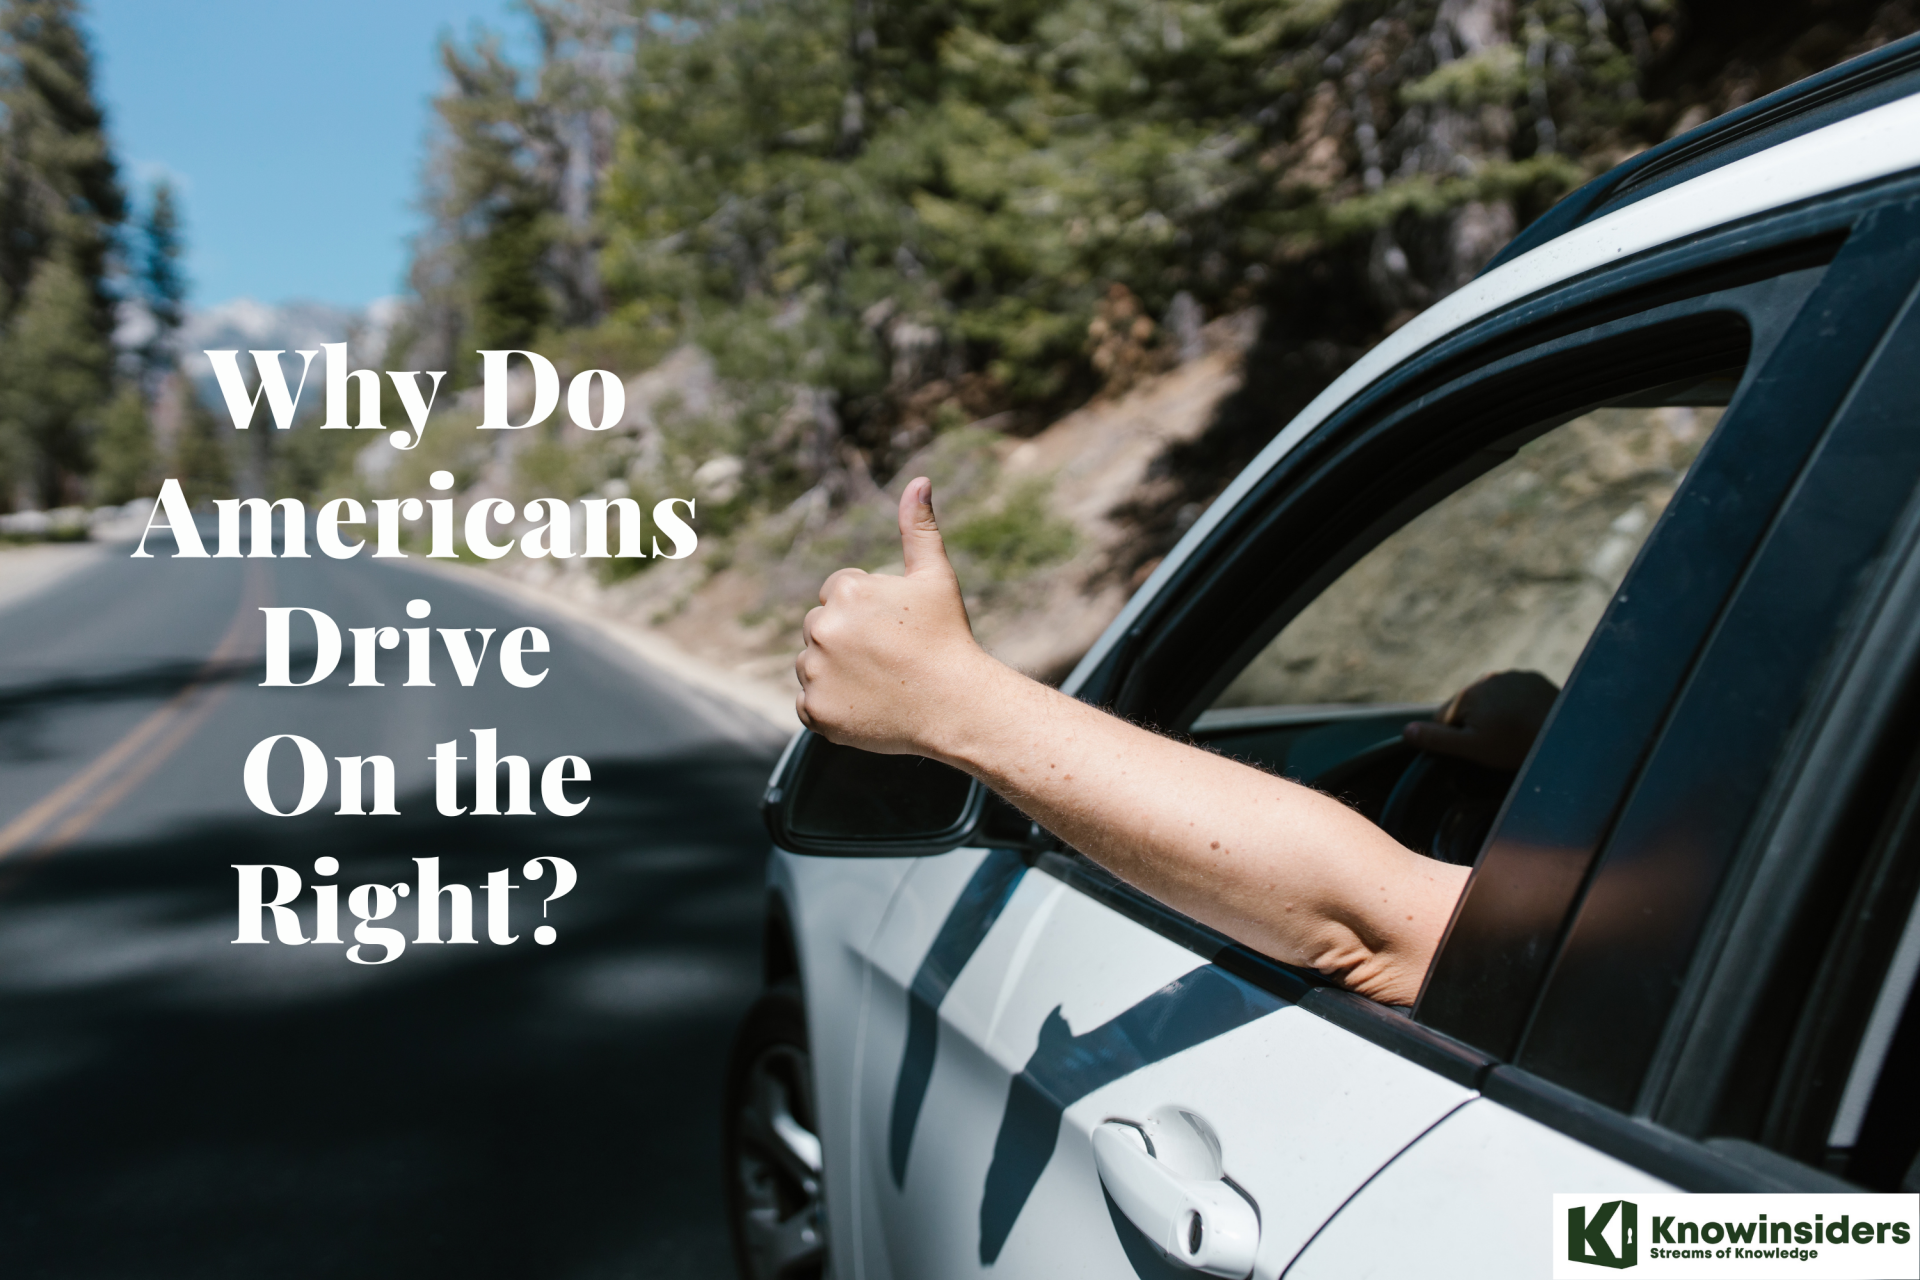 Why Do Americans Drive On the Right?